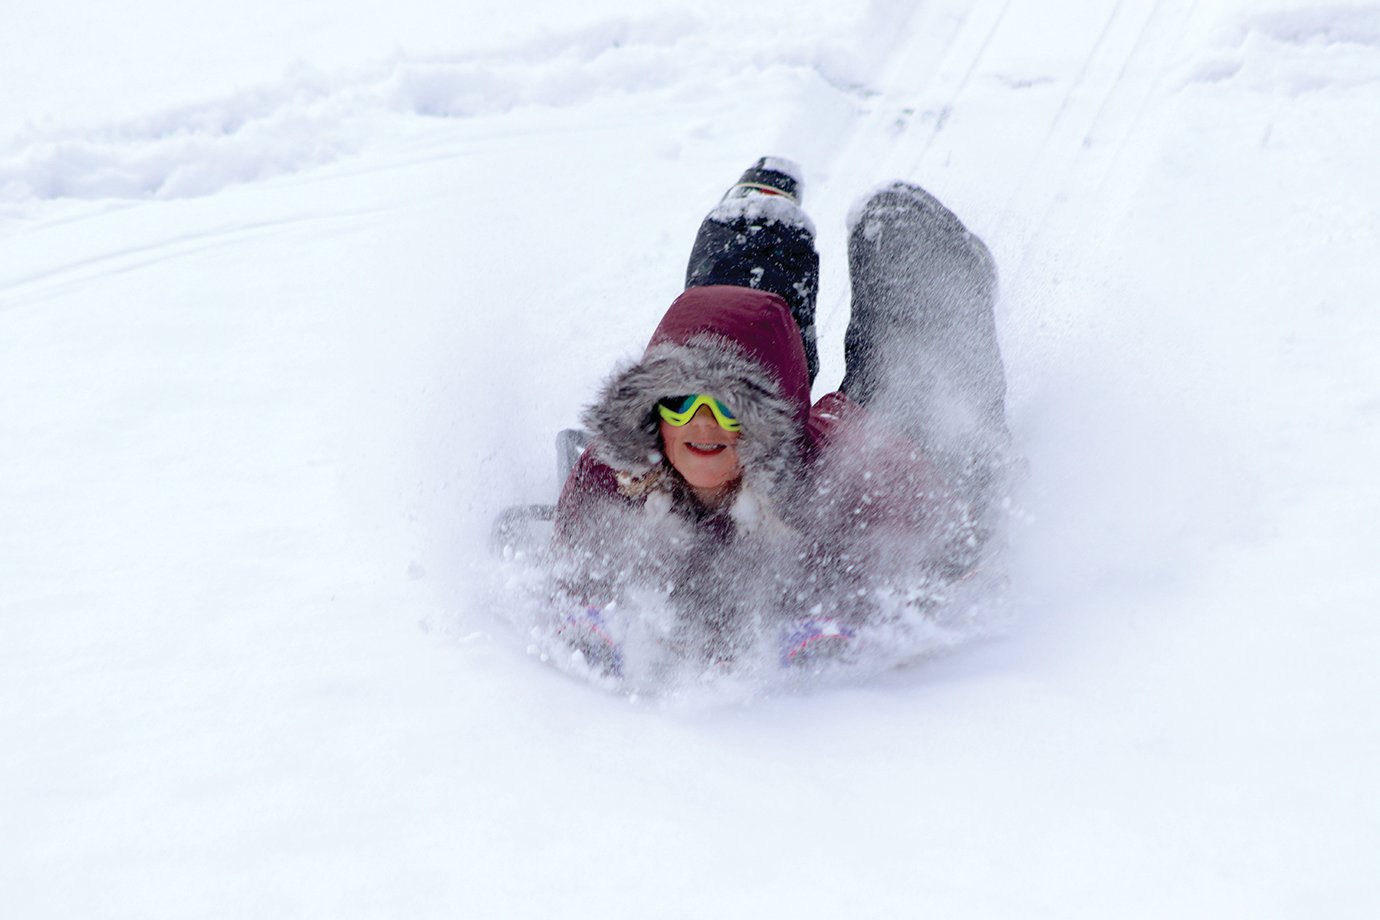 Eleven-year-old Mabel Hoar tries to avoid a face full of snow as she sleds; however, sometimes it's necessary, she said.